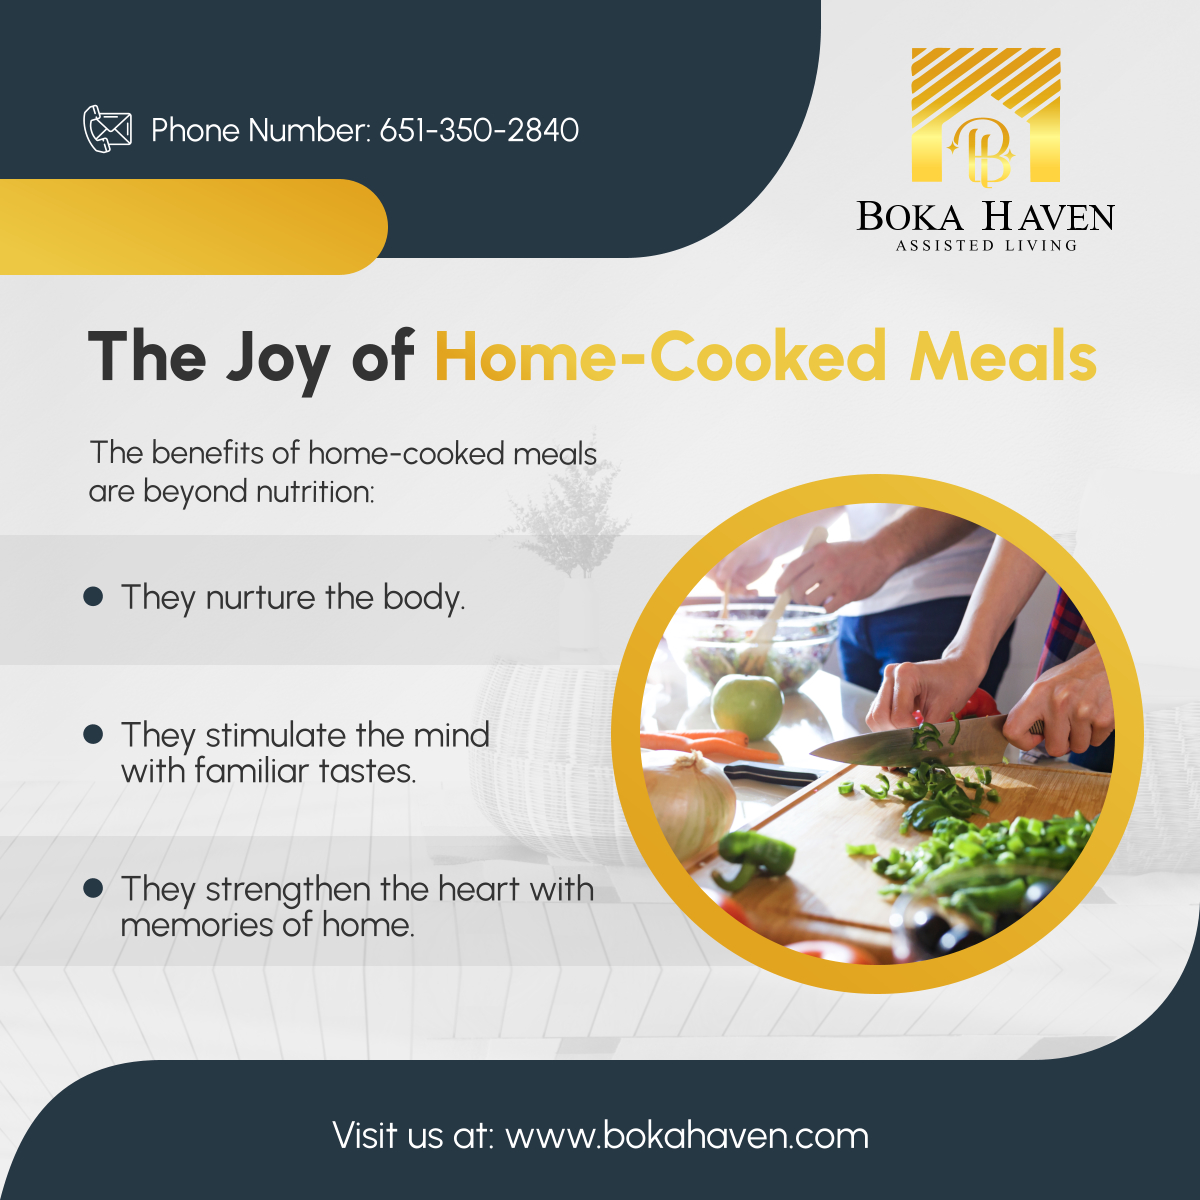 Mealtime should be a celebration of life and love. Home-cooked meals for seniors should be prepared with care, aiming to nourish your body and soul. 

Read more: facebook.com/photo/?fbid=12…
 
#NorthBranchMN #HomeCookedMeals #AssistedLiving